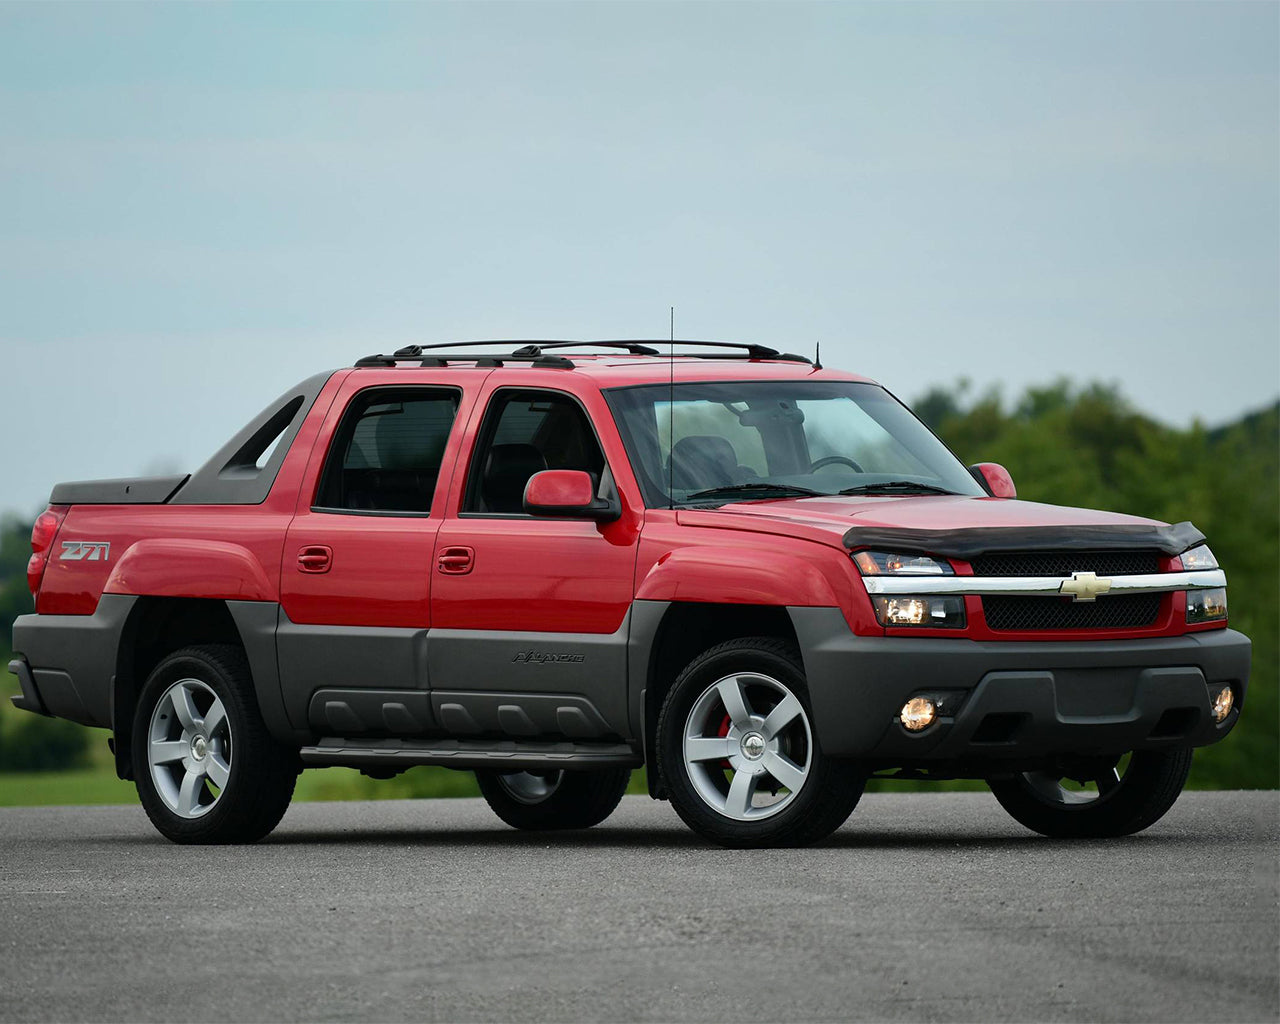 Red Chevrolet Avalanche 1500 Parked on the road in front of some trees and a blue sky